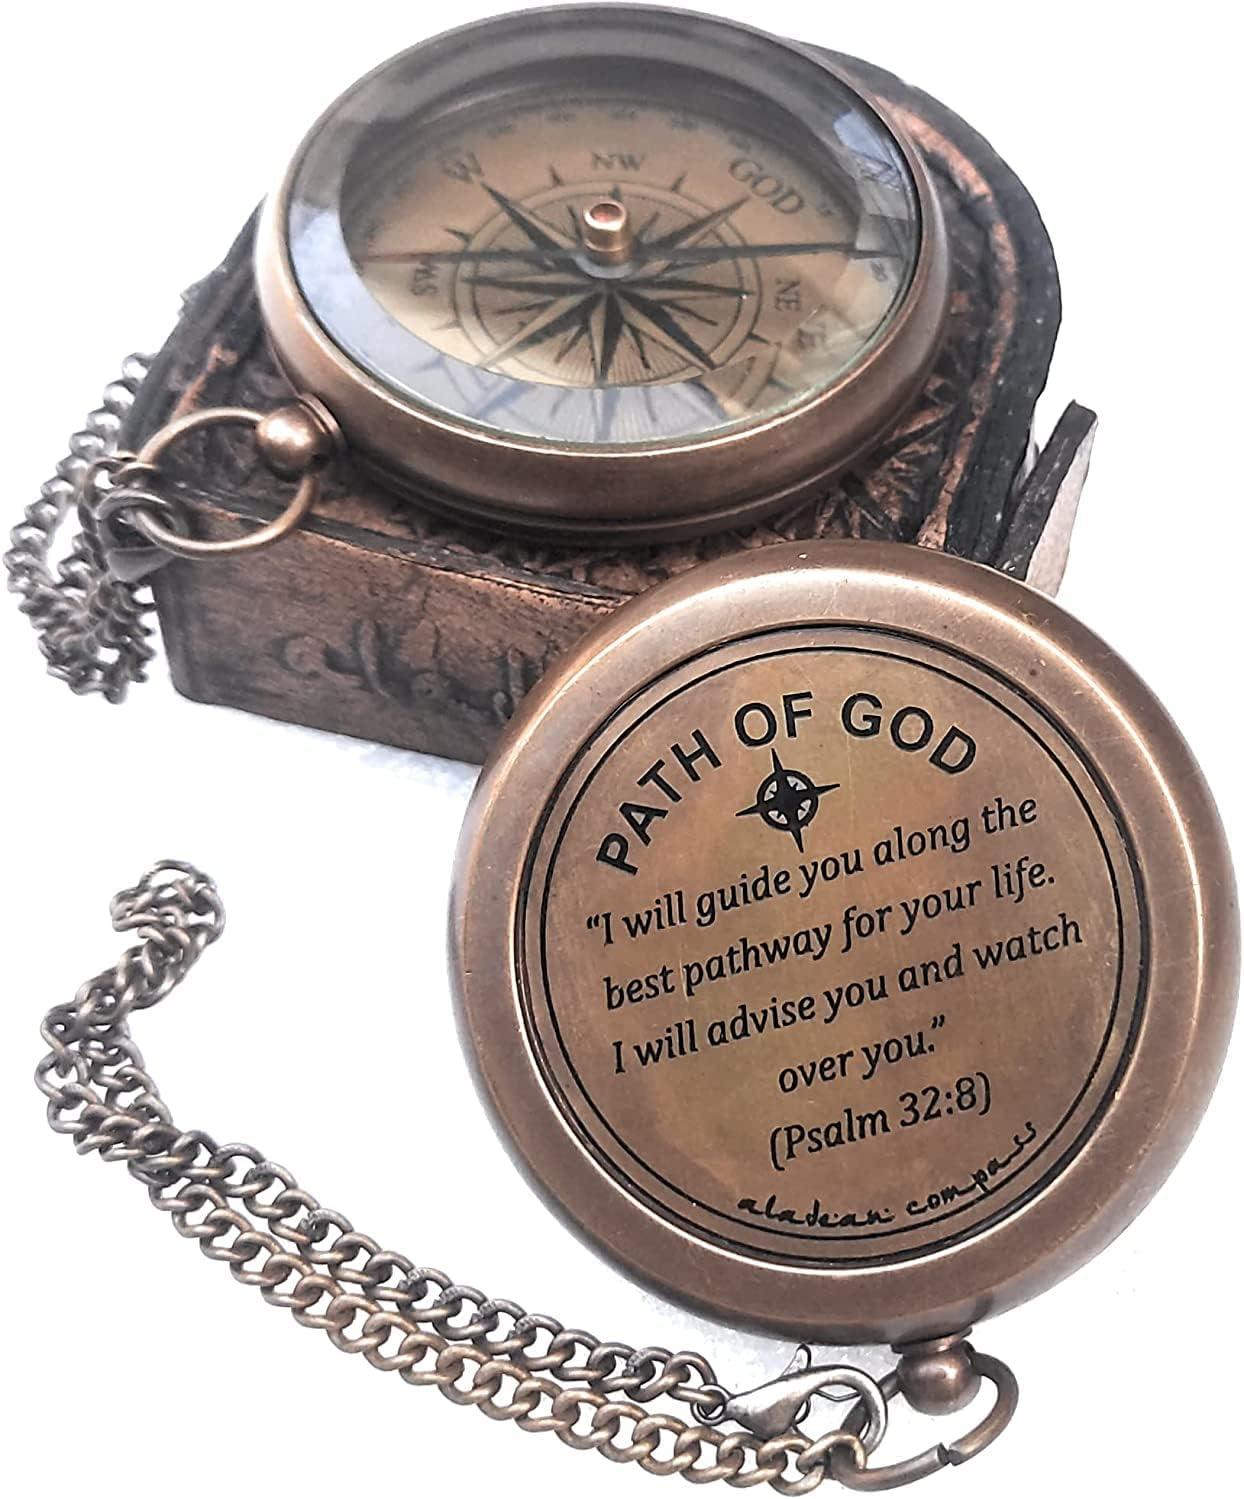 Amazon.com : Antiqula Brass Columbus Compass with Wooden Box, Antique  Traveling Gifts for Men with Quotes Engraved, Inspirational Nautical  Camping Compass, Ideal Gifts for Traveling, Graduation and Adventures :  Sports & Outdoors